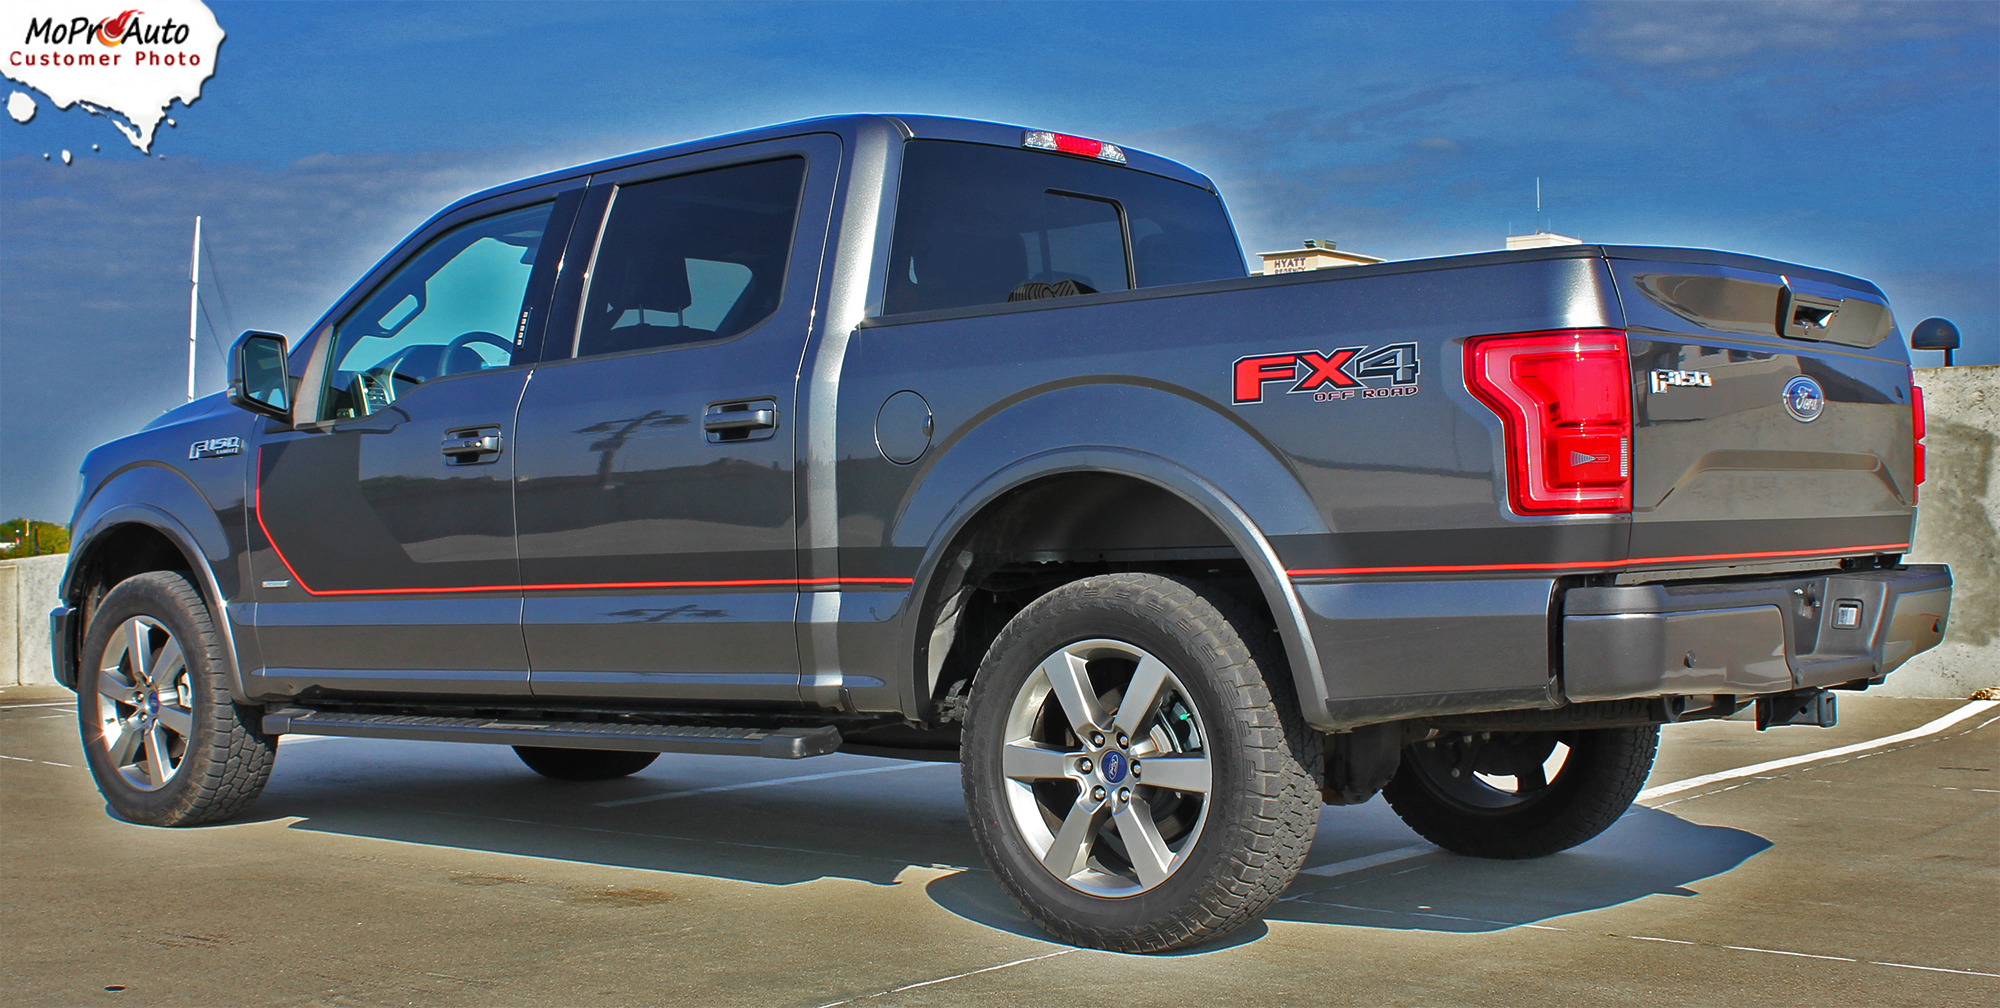 2021, 2022, 2023 Sideline Special Edition Ford F-Series F-150 Door Hockey Stick Appearance Package Vinyl Graphics and Decals Kit by MoProAuto Pro Design Series